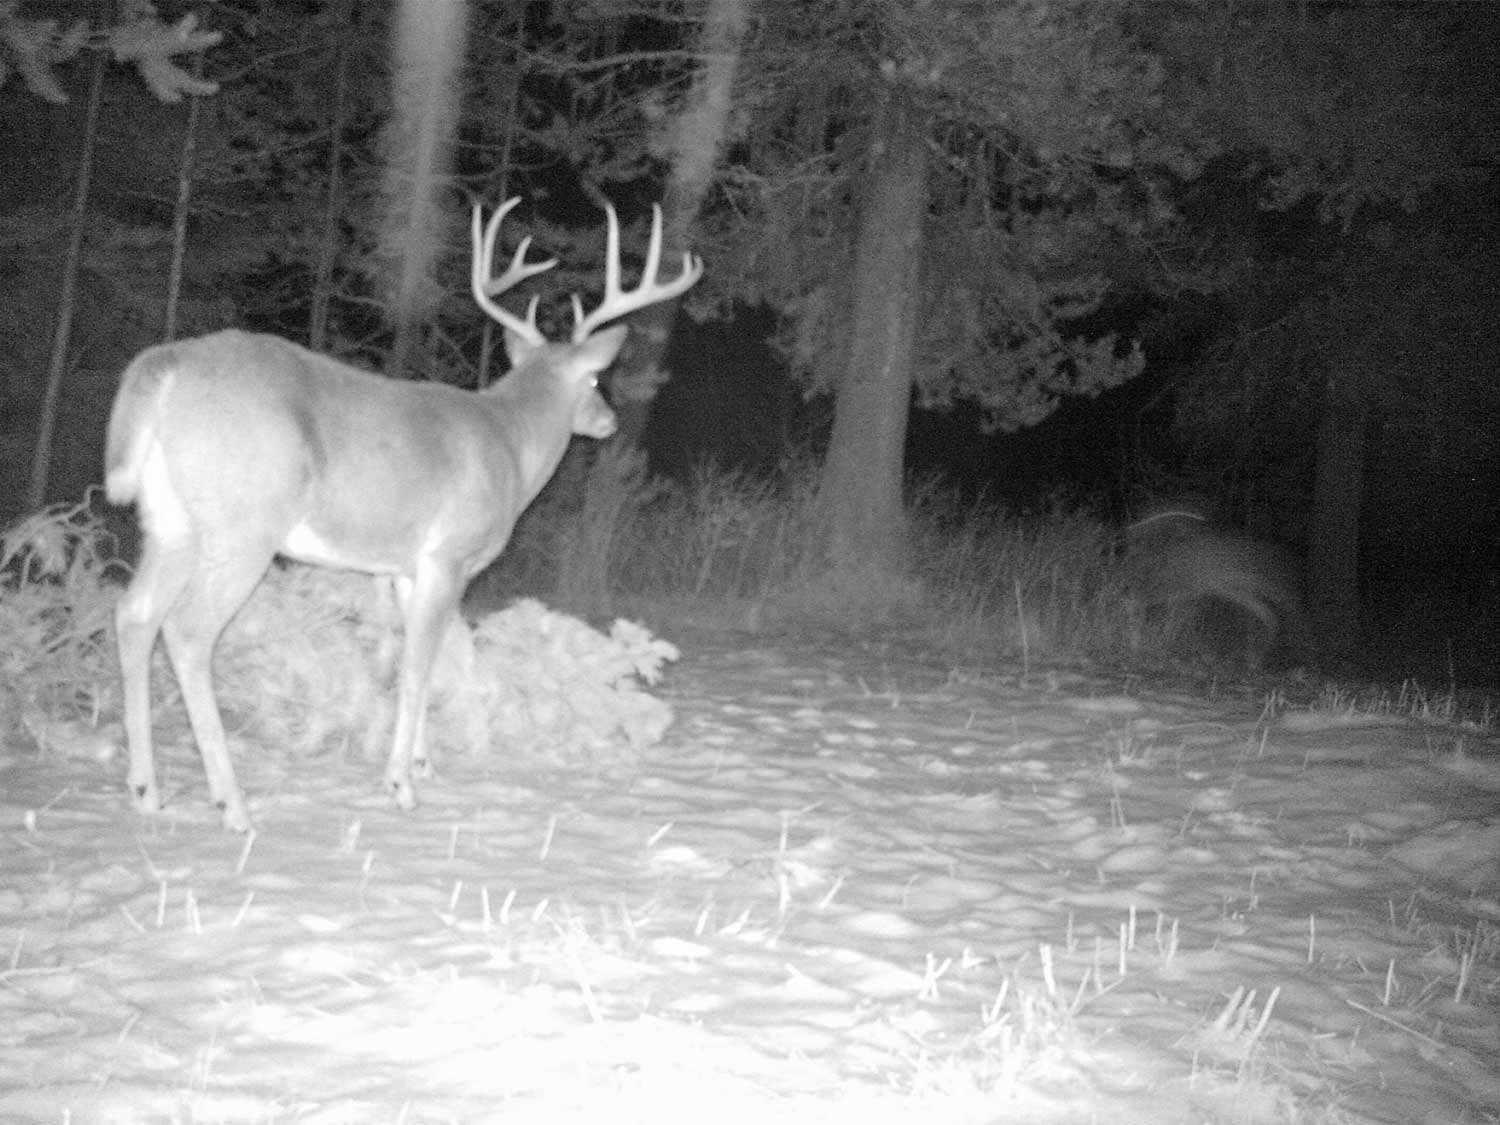 trail camera footage of a deer at night